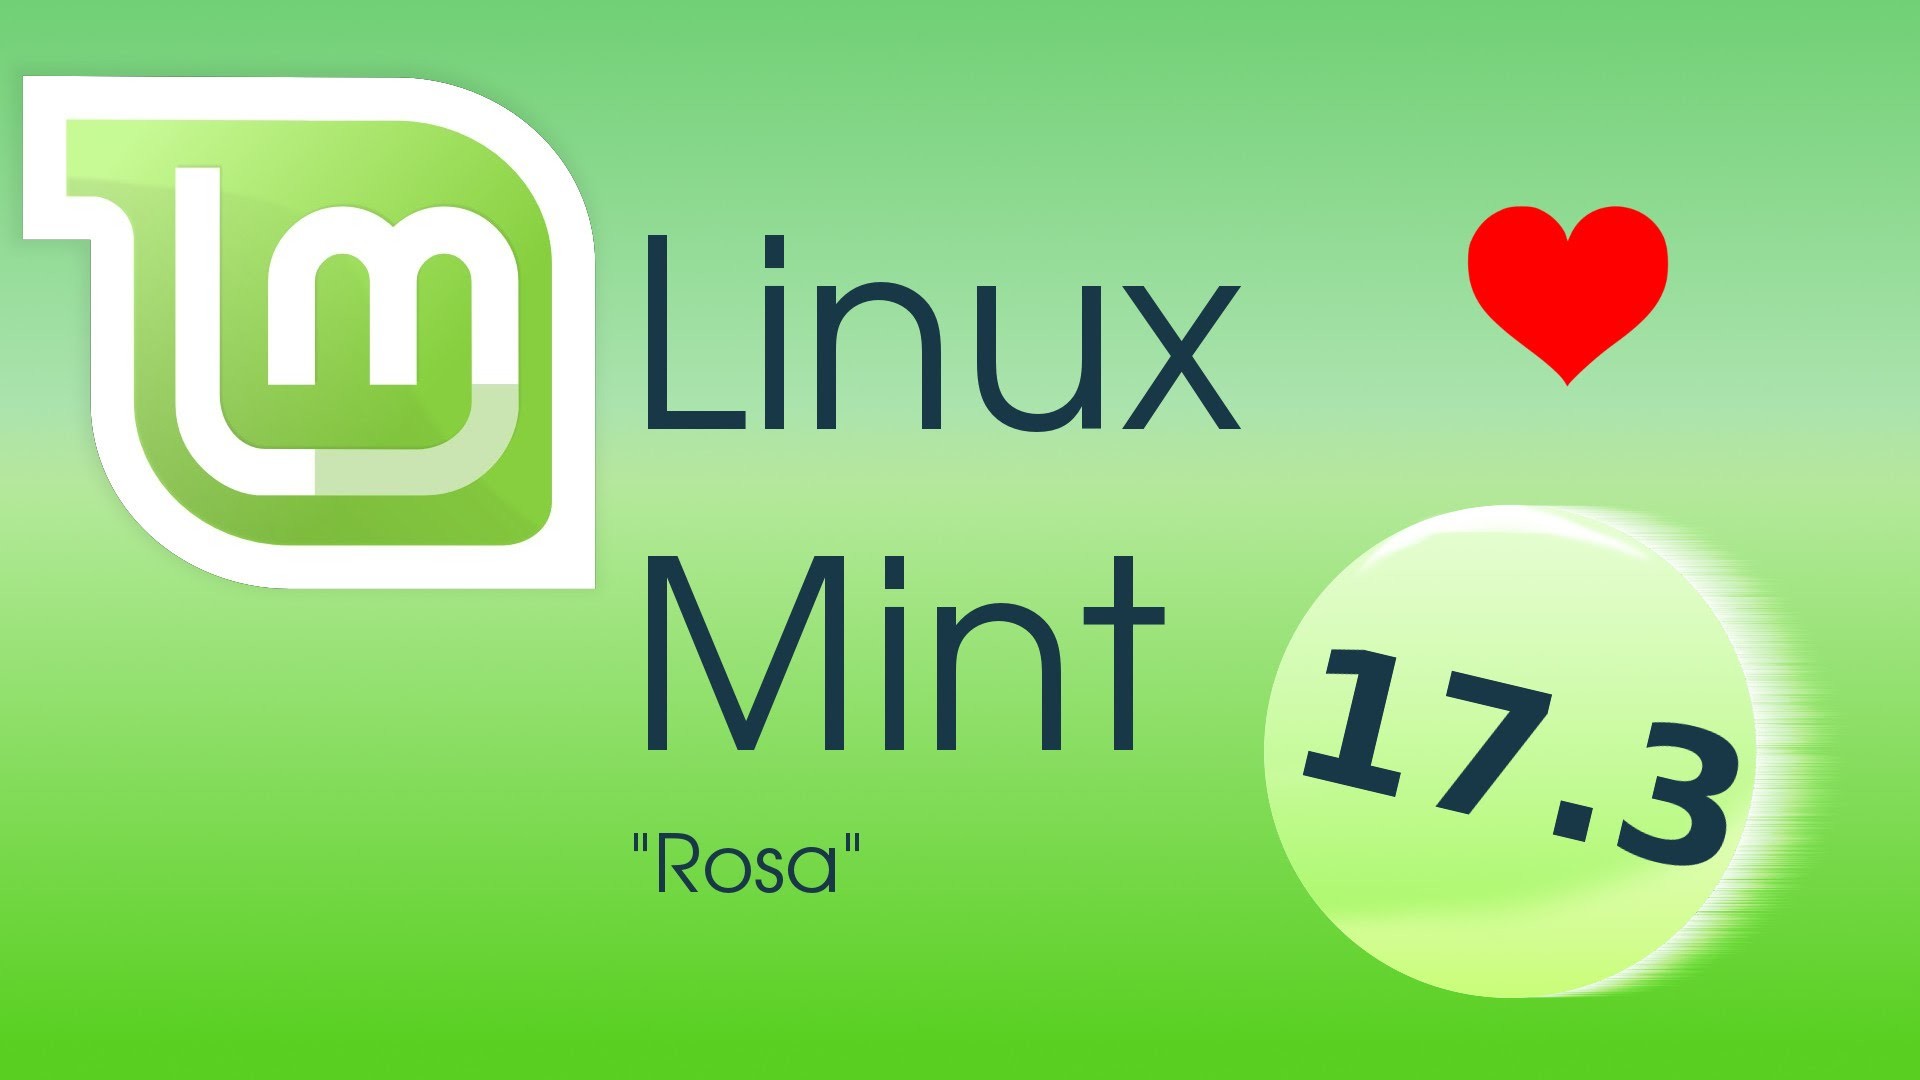 1920x1080 Linux Mint 17.3 "Rosa", I'm IN LOVE with Rosa.